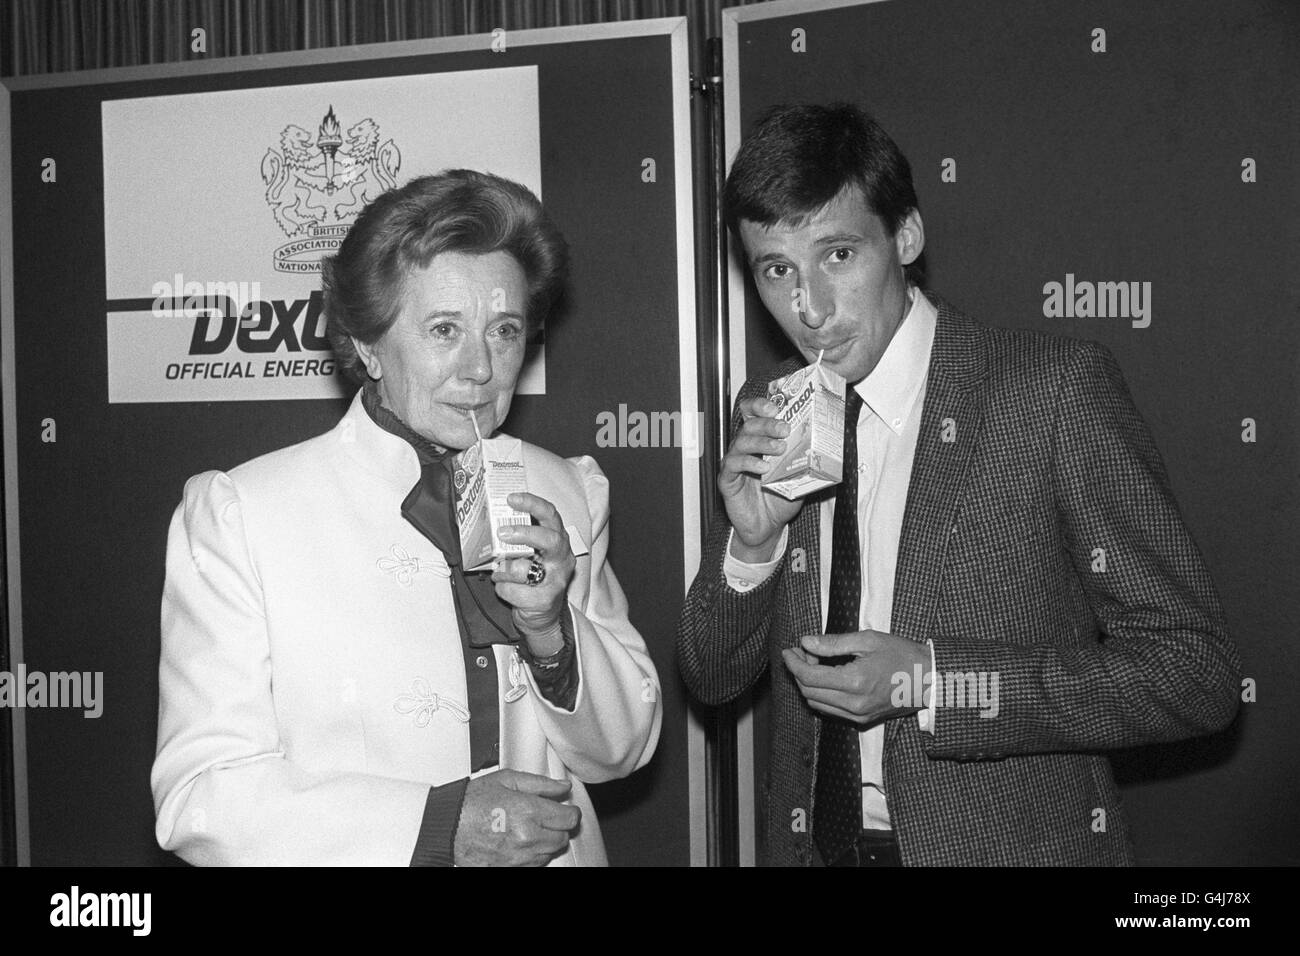 Ice Skating coach Betty Callaway (l), coach to Jayne Torvill and Christopher Dean (not pictured), with athlete Seb Coe (r) enjoy a glucose drink in London where the British Association of National Coaches and their sponsor Dextrosol glucose tablets announced the launch of the BANC Dextrosol Coach of the Year Award 1985-86. Stock Photo